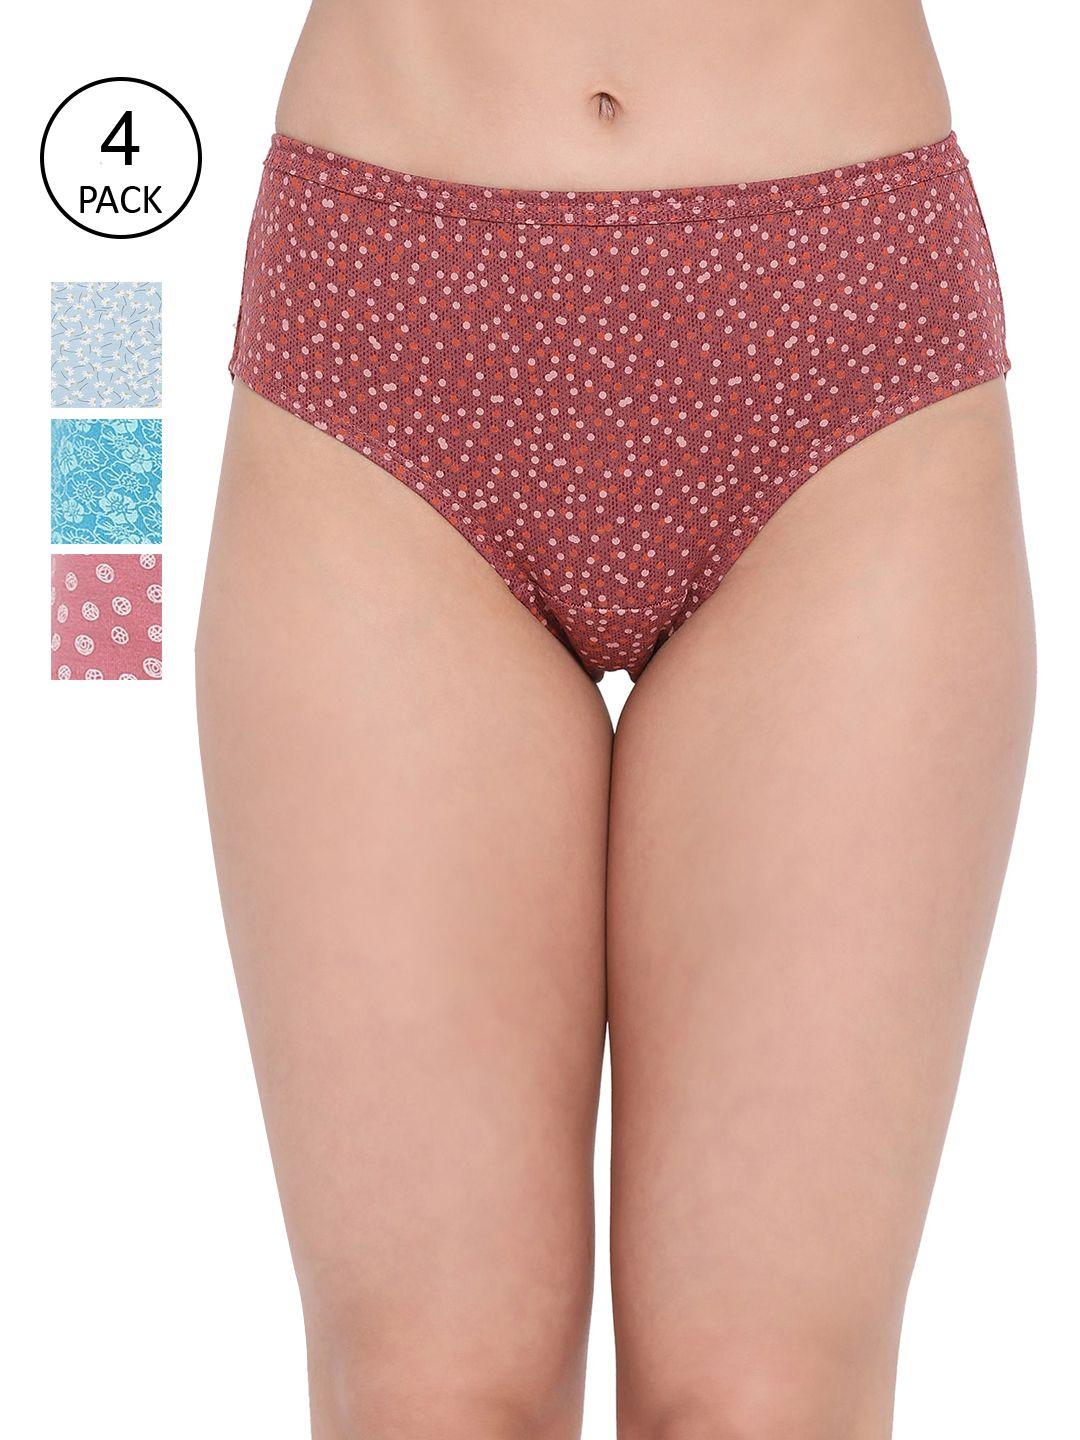 lyra-women-pack-of-4-assorted-printed-cotton-hipster-briefs